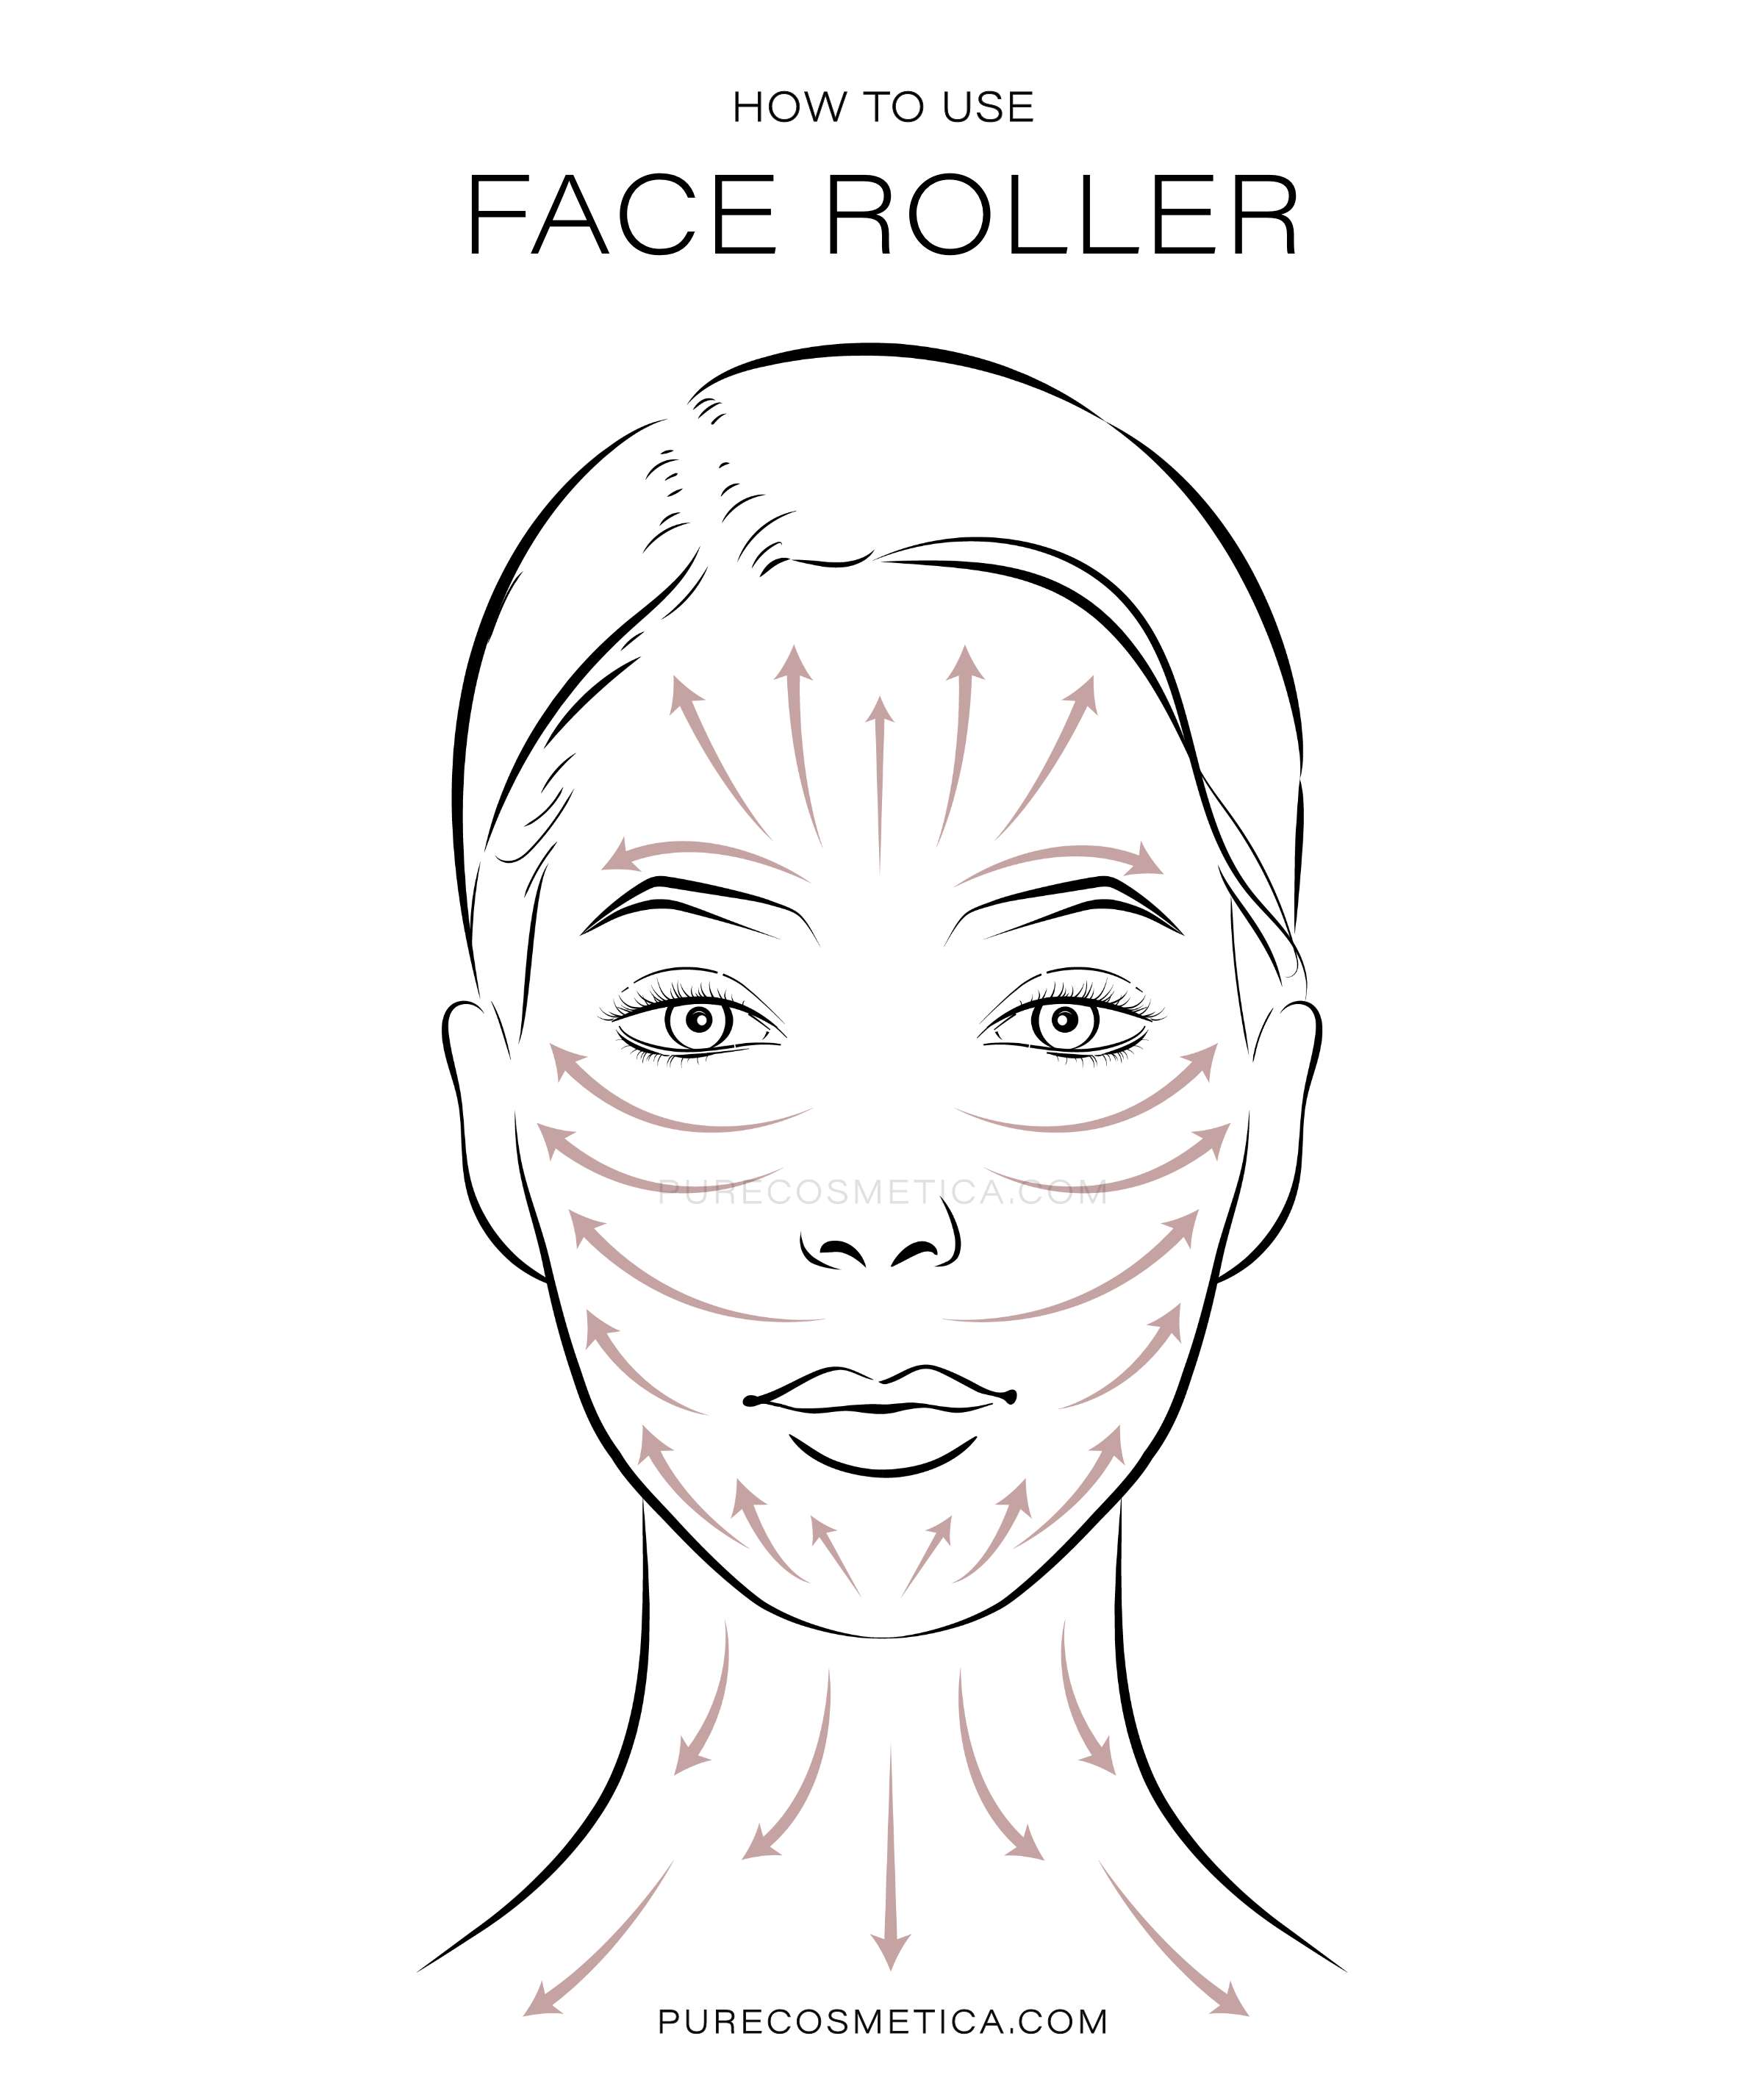 How to use a face roller